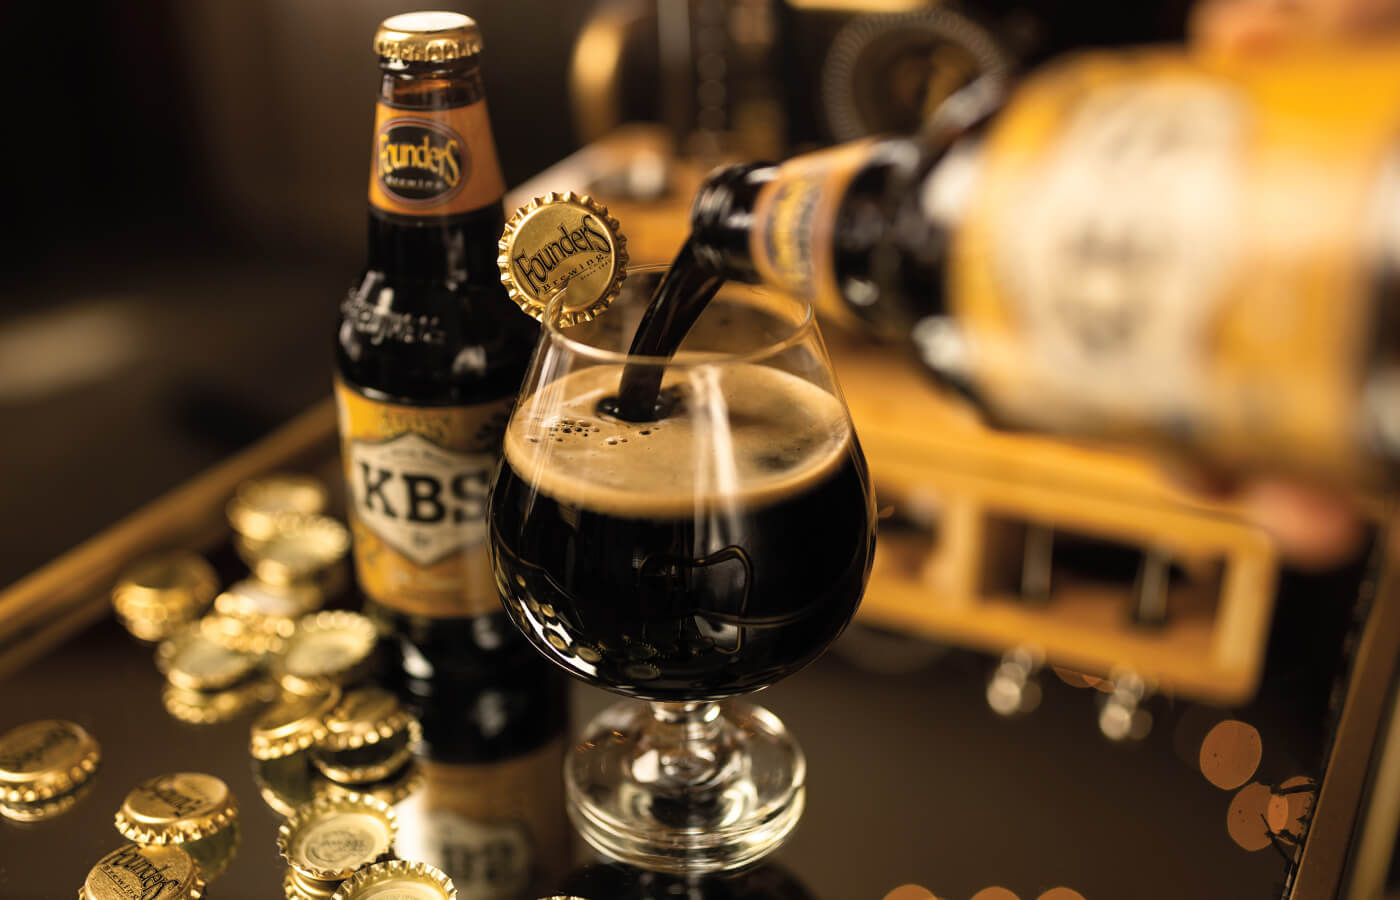 Bottle of KBS being poured into snifter